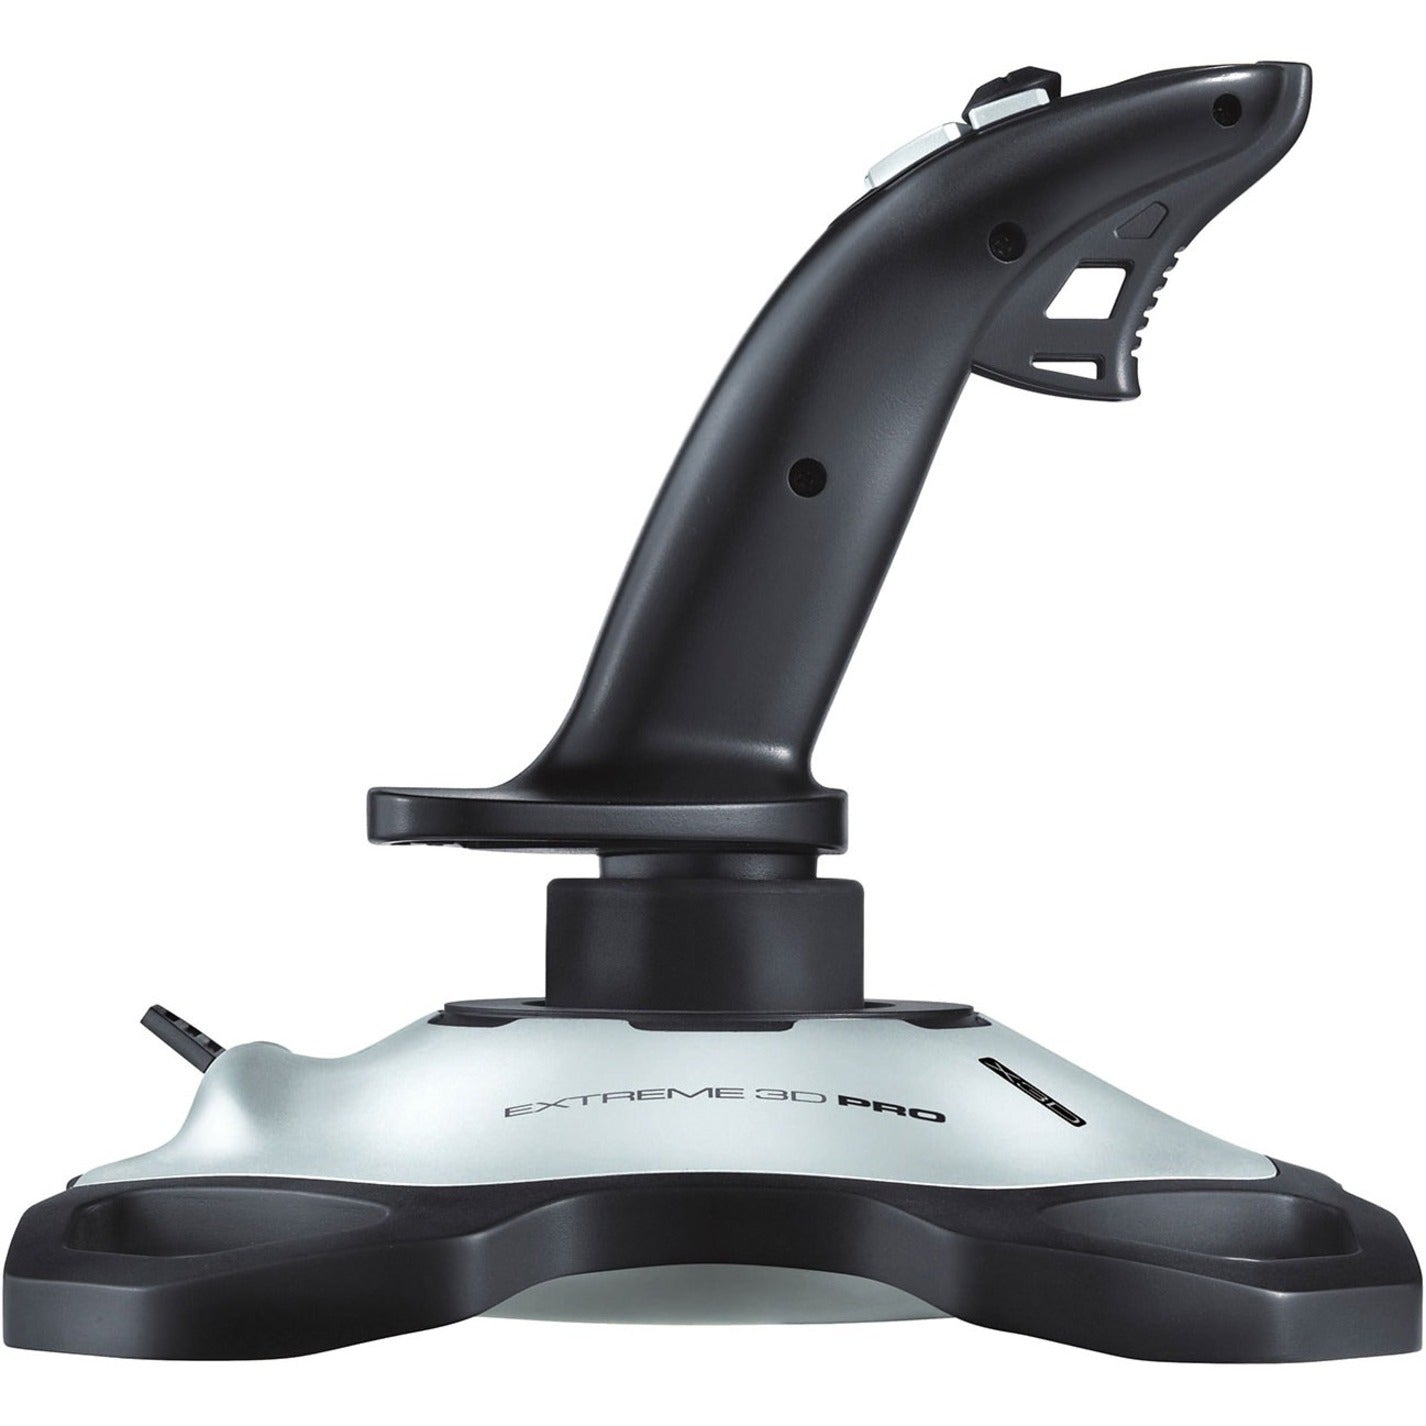 Logitech 963290-0403 Extreme 3D Pro Joystick, USB Cable, PC, Mac - Customize Buttons, Double Functionality, Quick Switching, Game Profiles